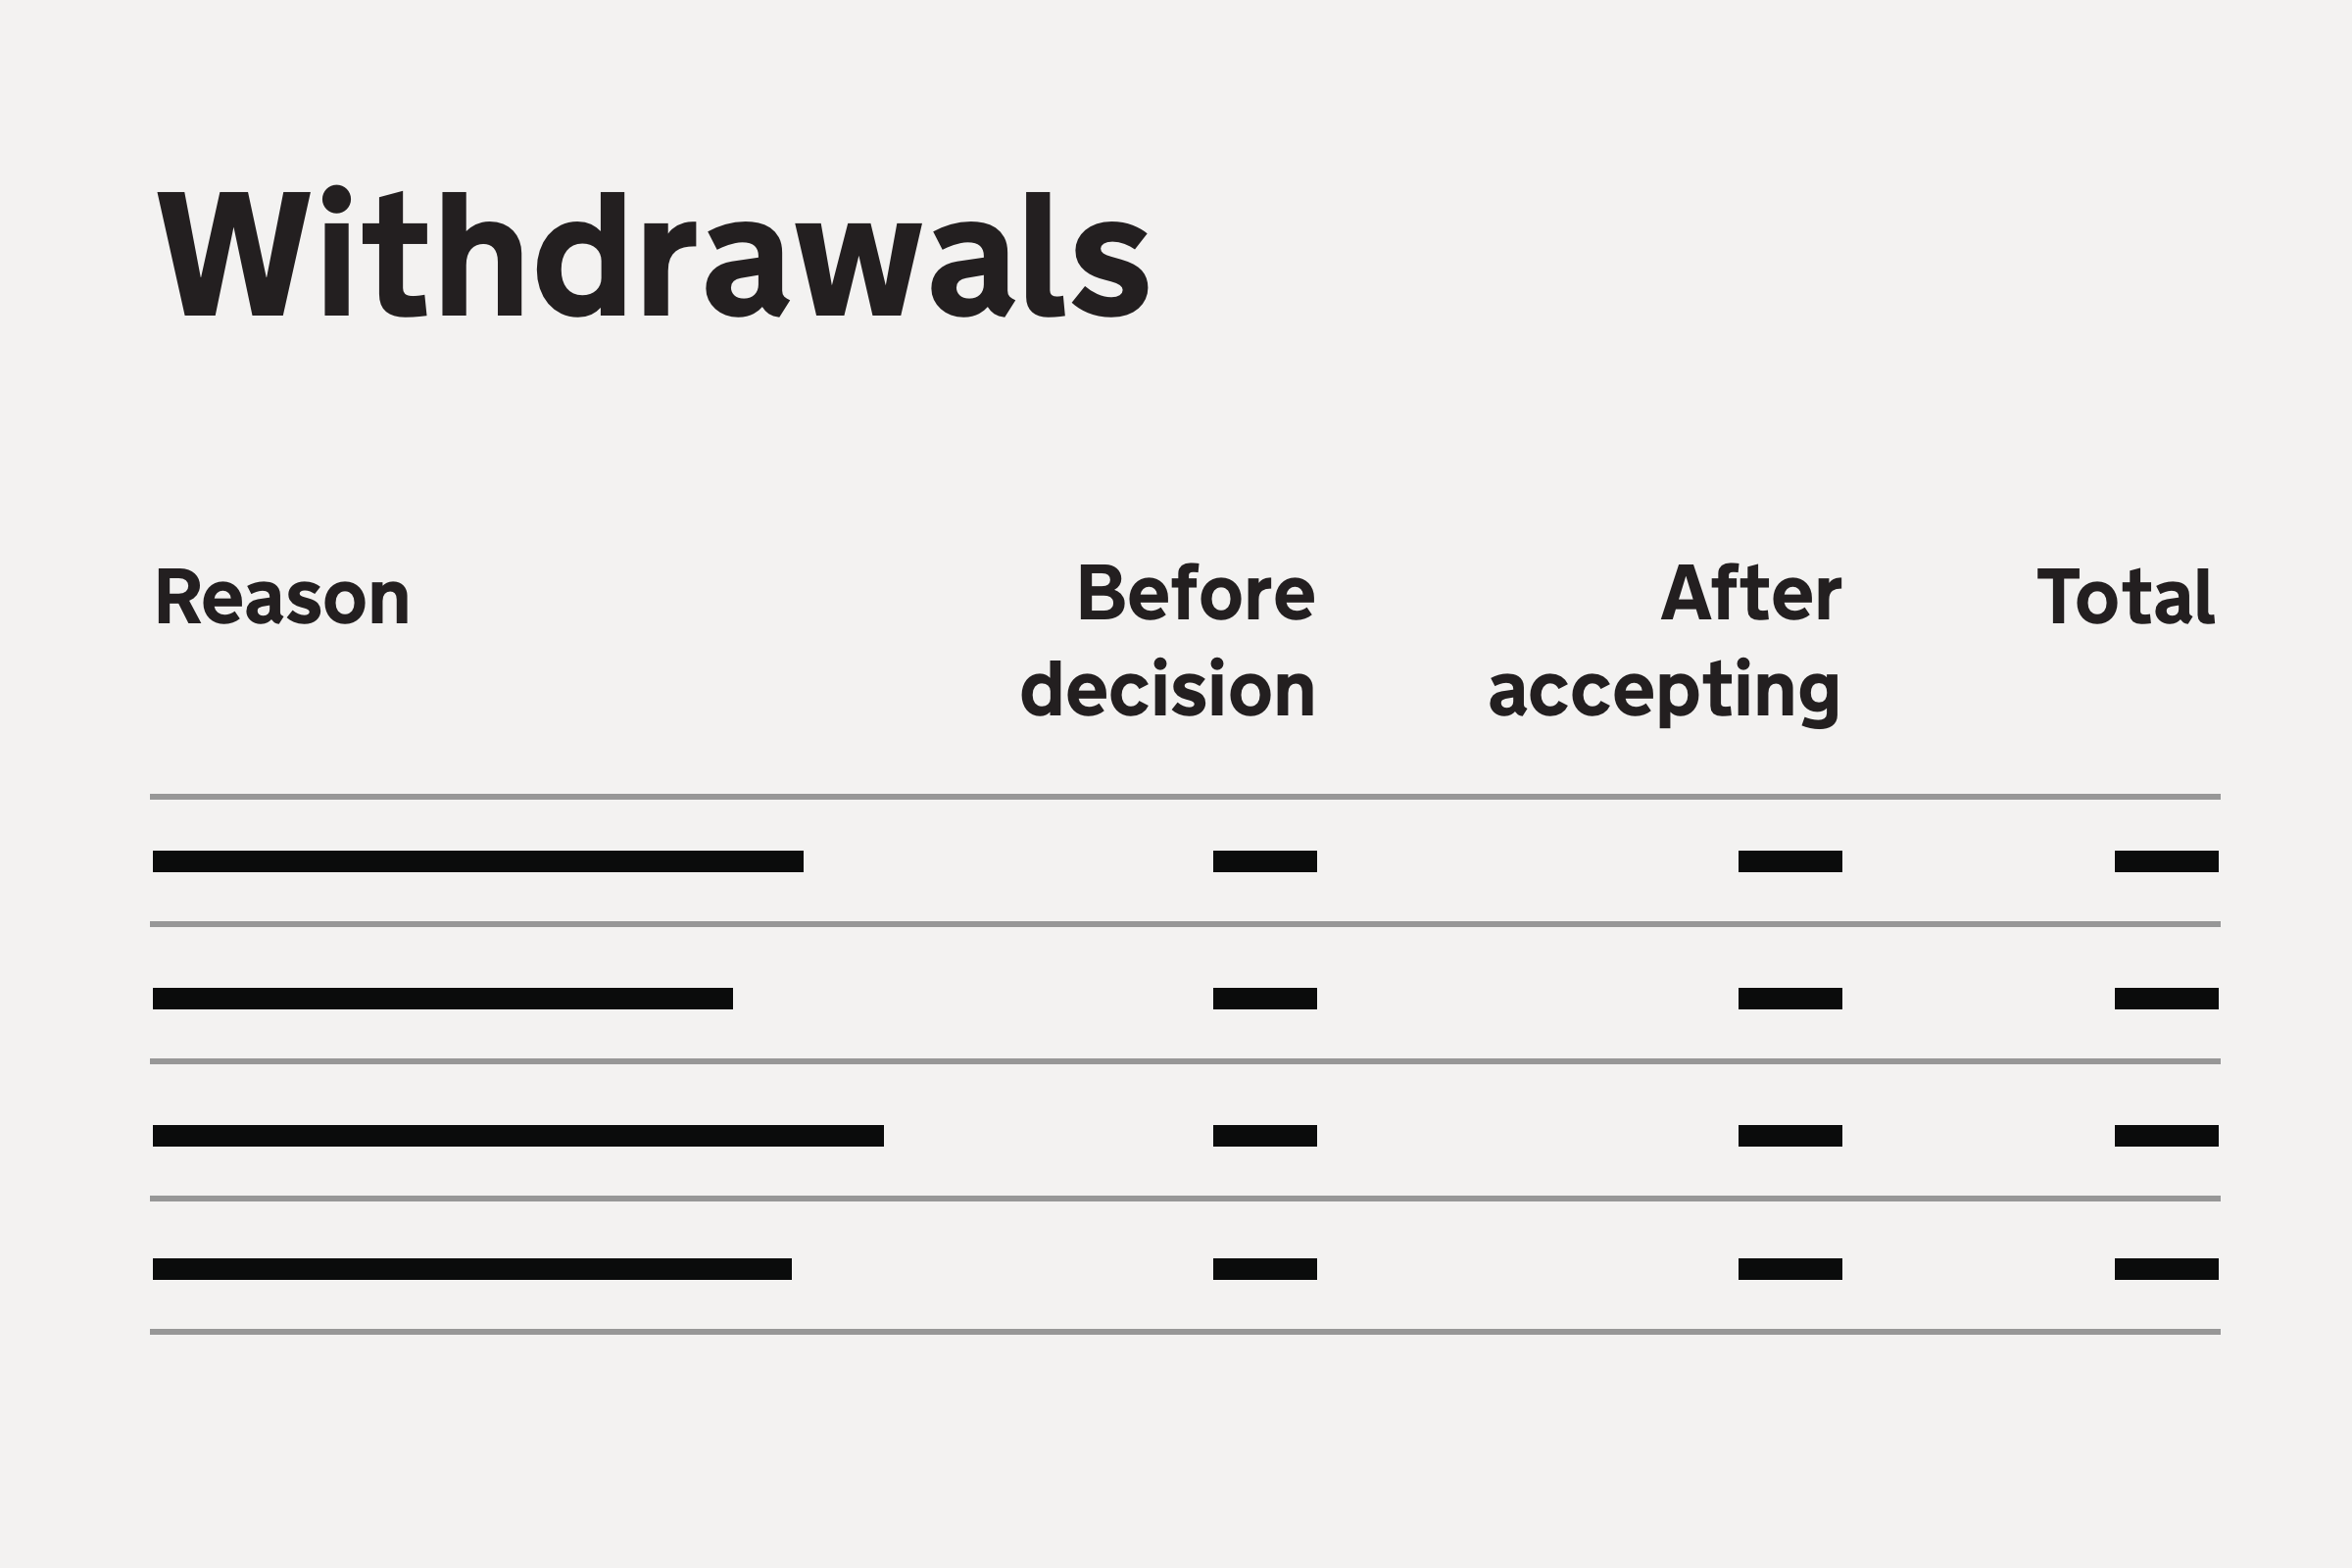 Illustration with the heading 'Withdrawals' followed by a table with 4 columns: Reason, Before decision, After accepting, Total.